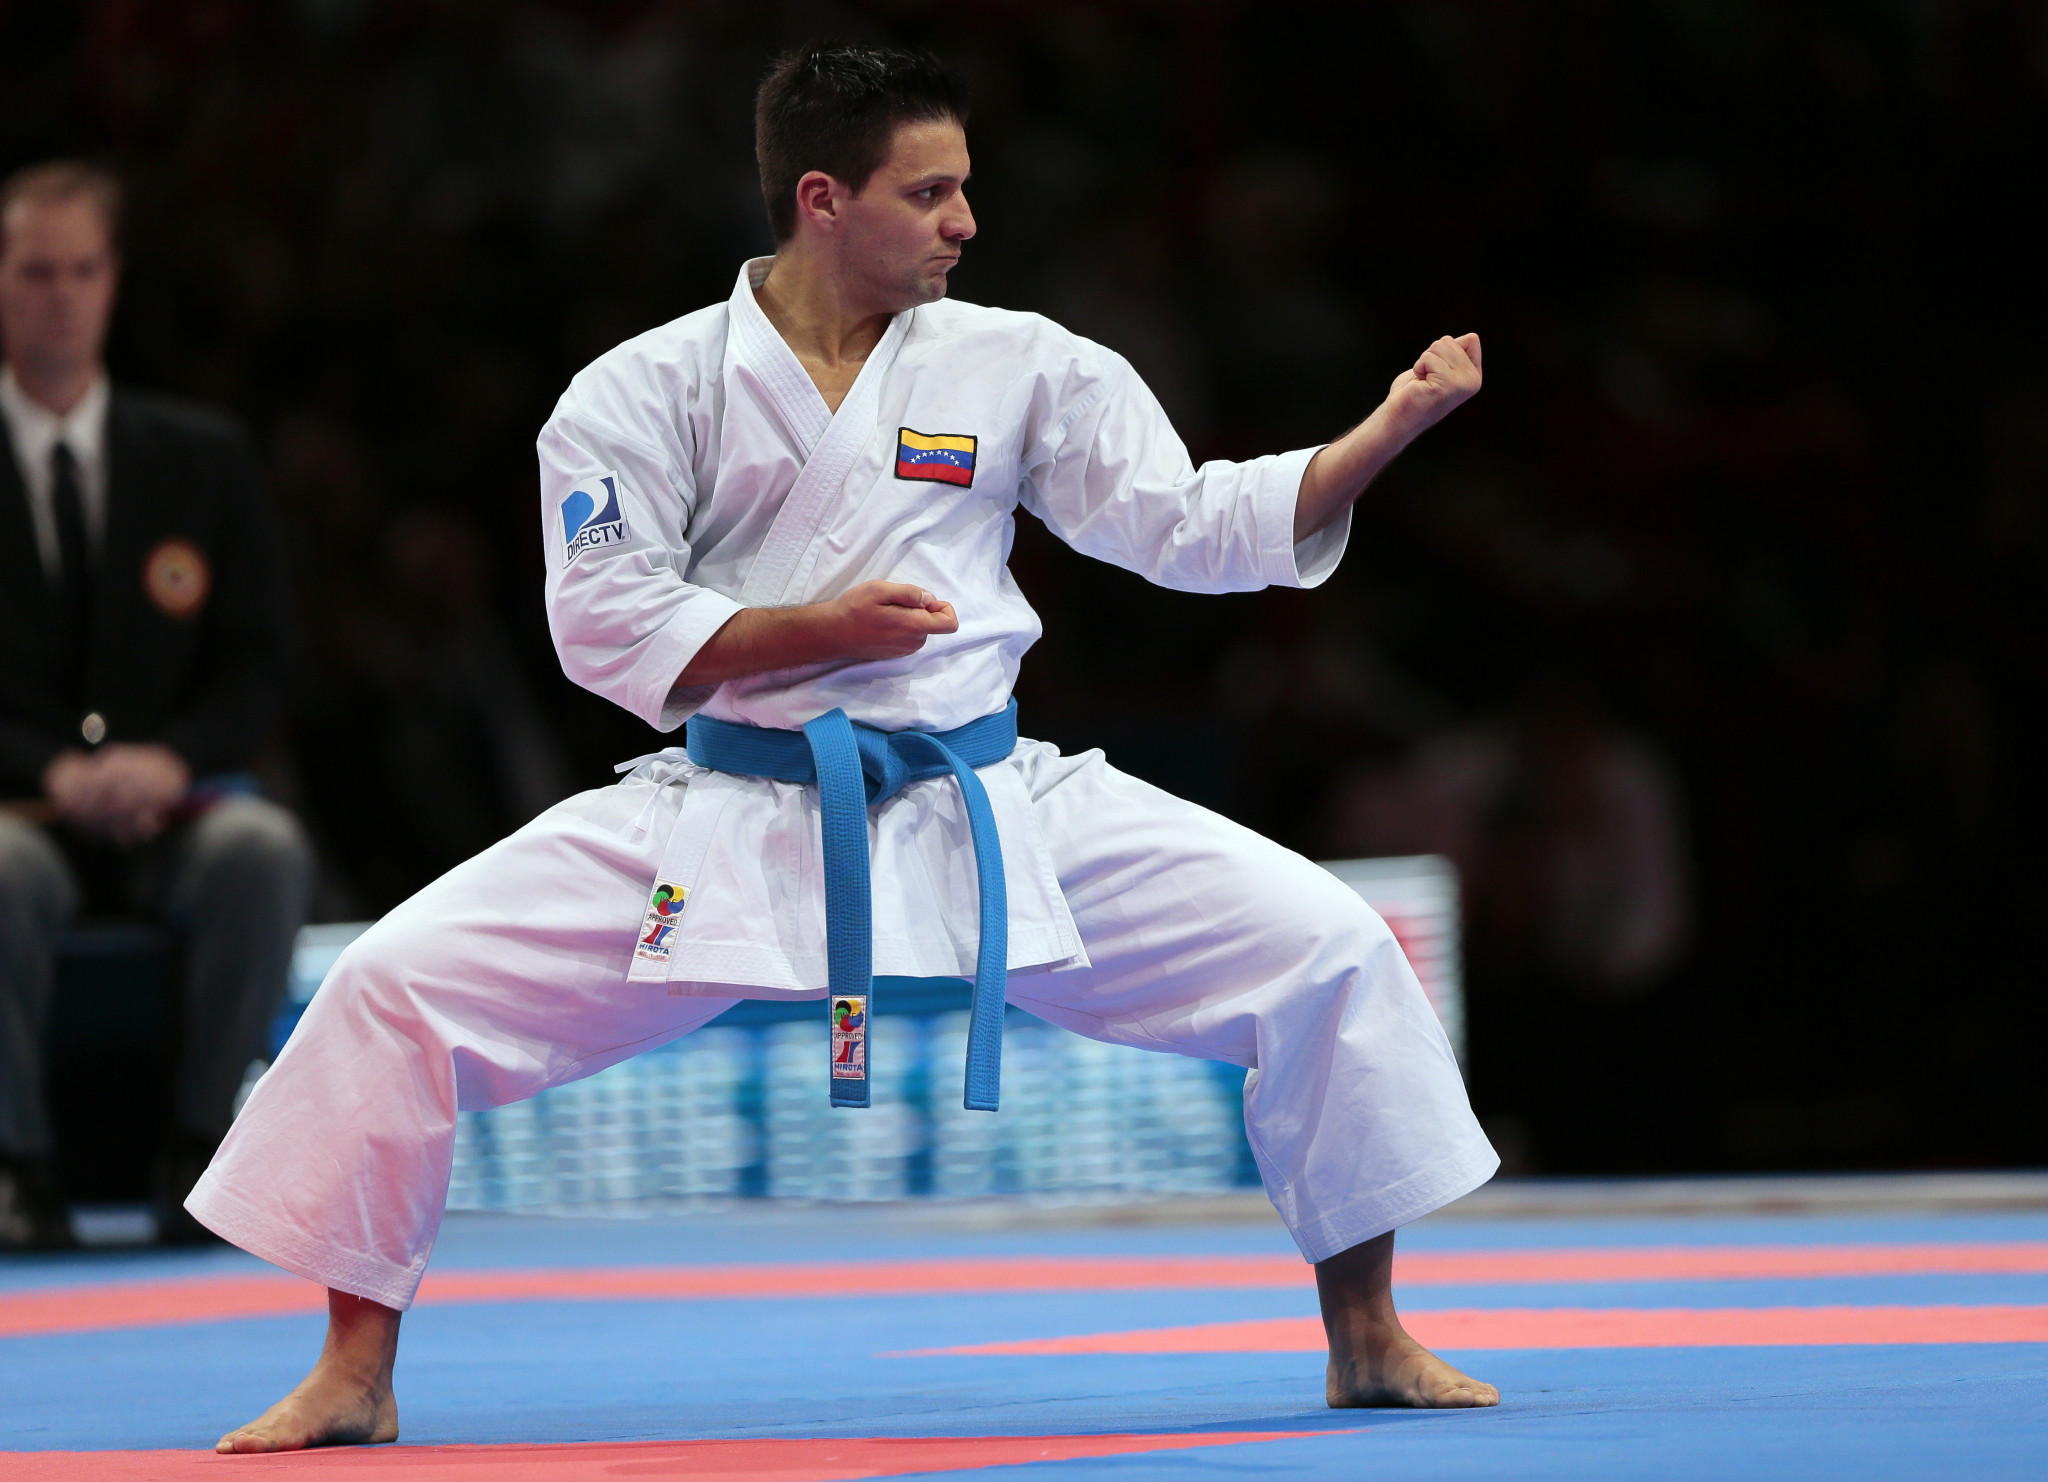 Venezuela's Antonio Diaz will go for his 17th gold at the Pan American Karate Championships ©Getty Images